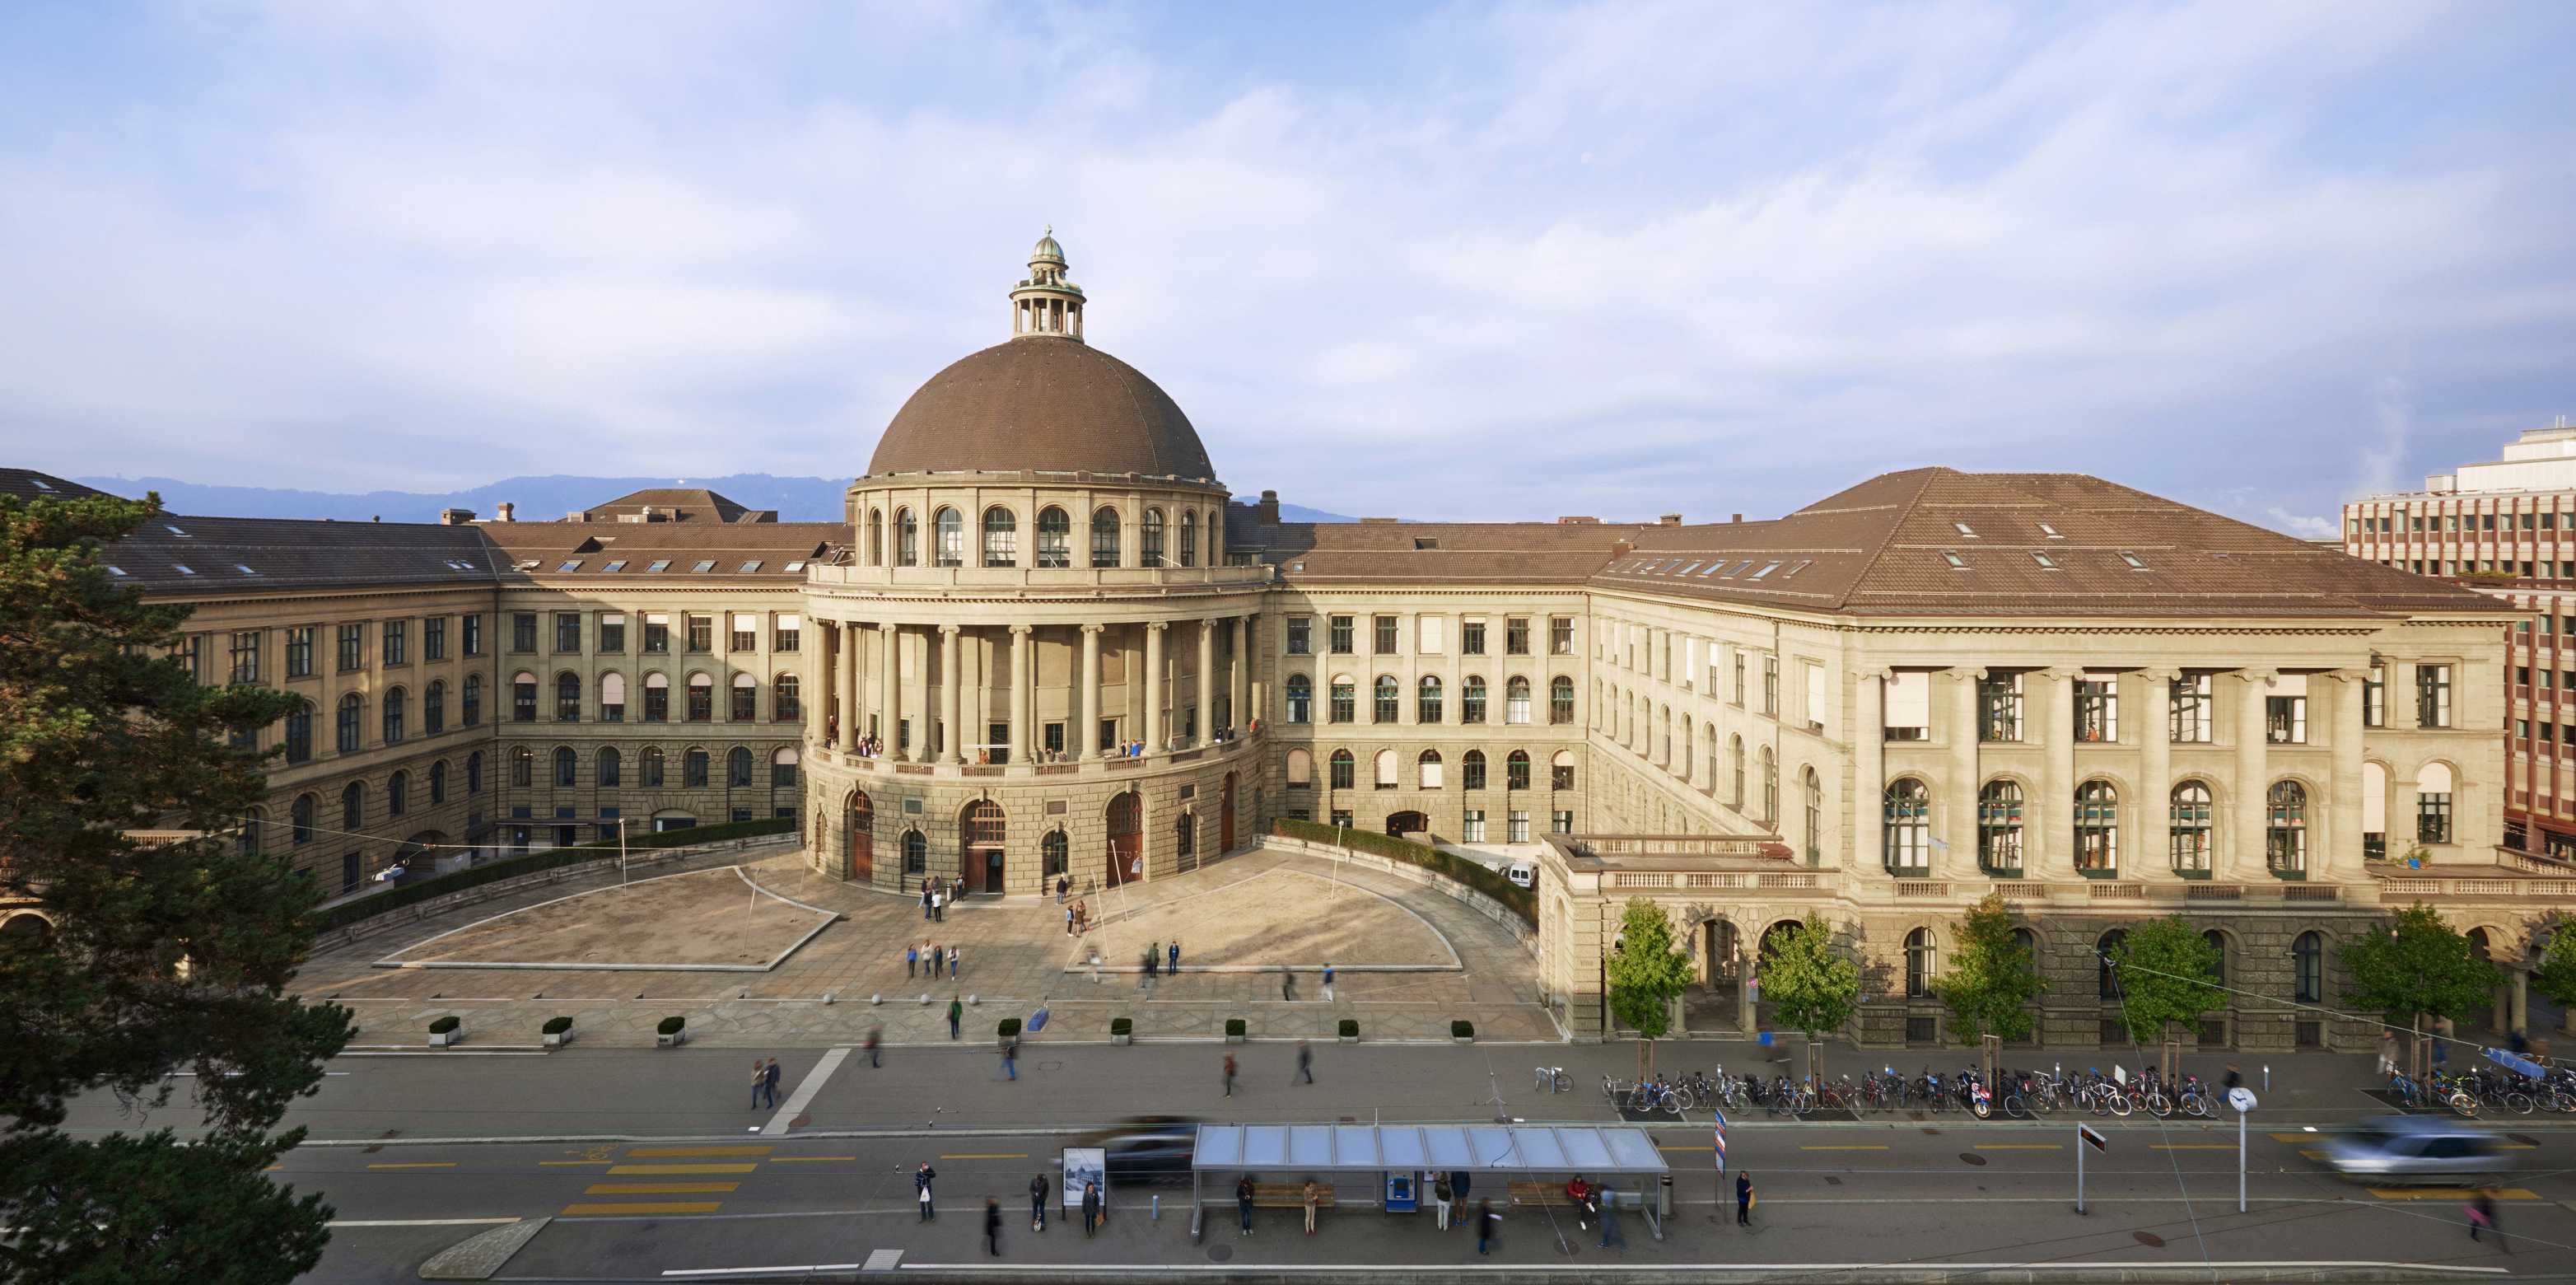 Main building of the ETH Zurich